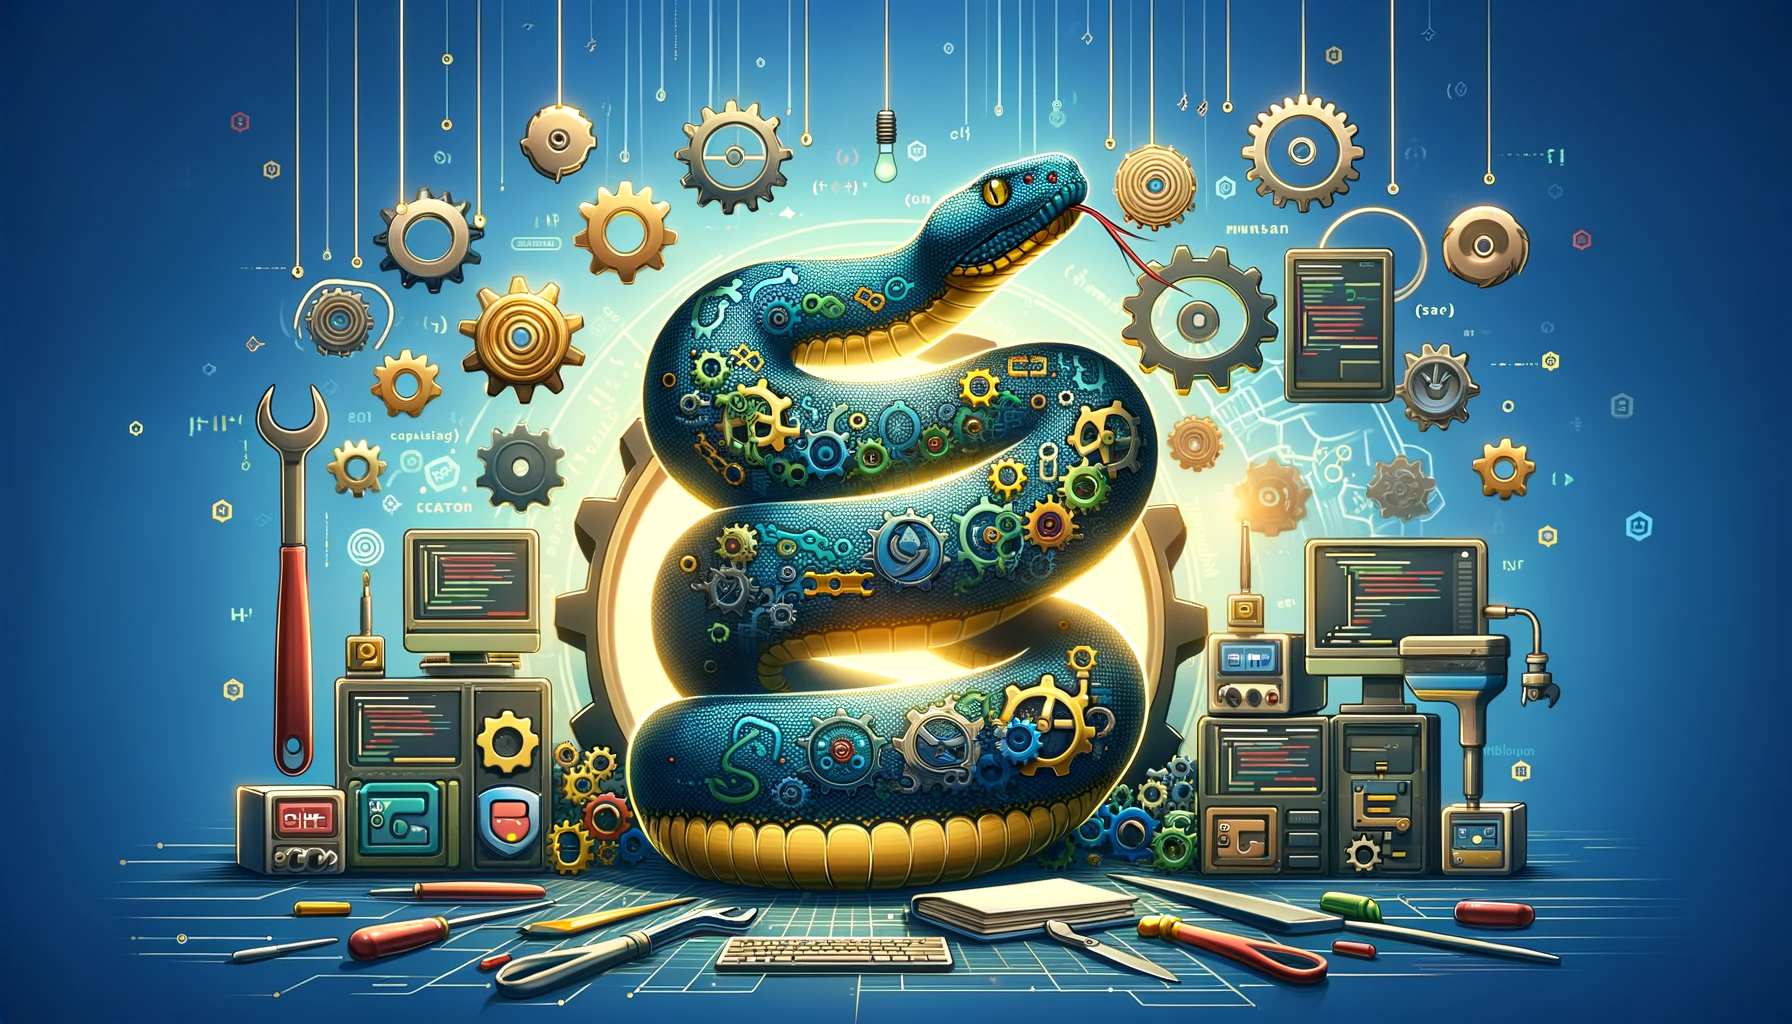 An intricate digital artwork showcasing a mechanical snake with various gears and tools representing Python function optimization tips for better code maintainability, surrounded by computer screens displaying code, books on programming, and electronic components, all against a vibrant blue background symbolizing technological innovation and software development.